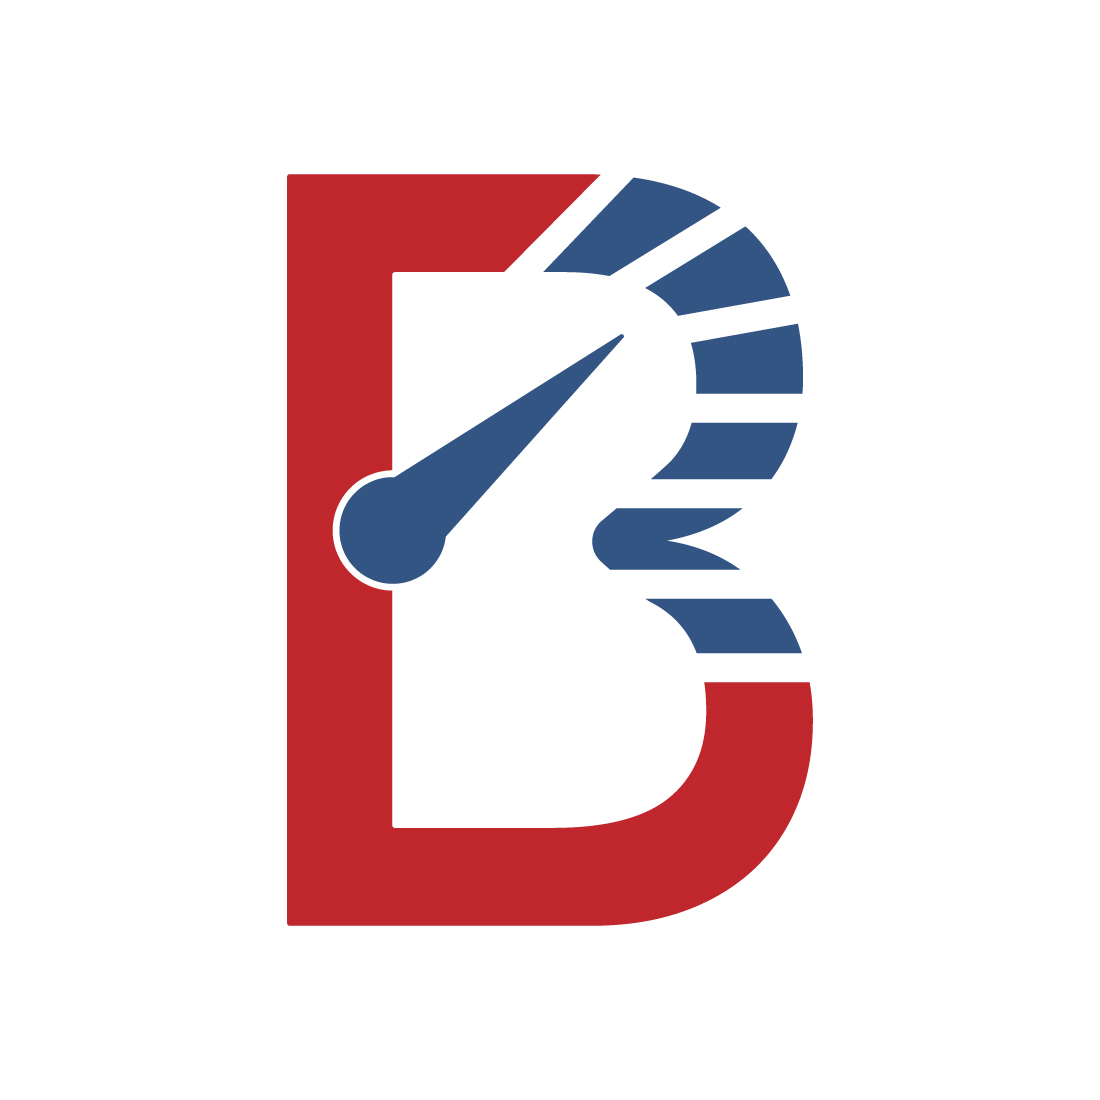 Initials B letters logo design vector icon design B Meter logo design B clock logo best brand red and blue color company identity preview image.